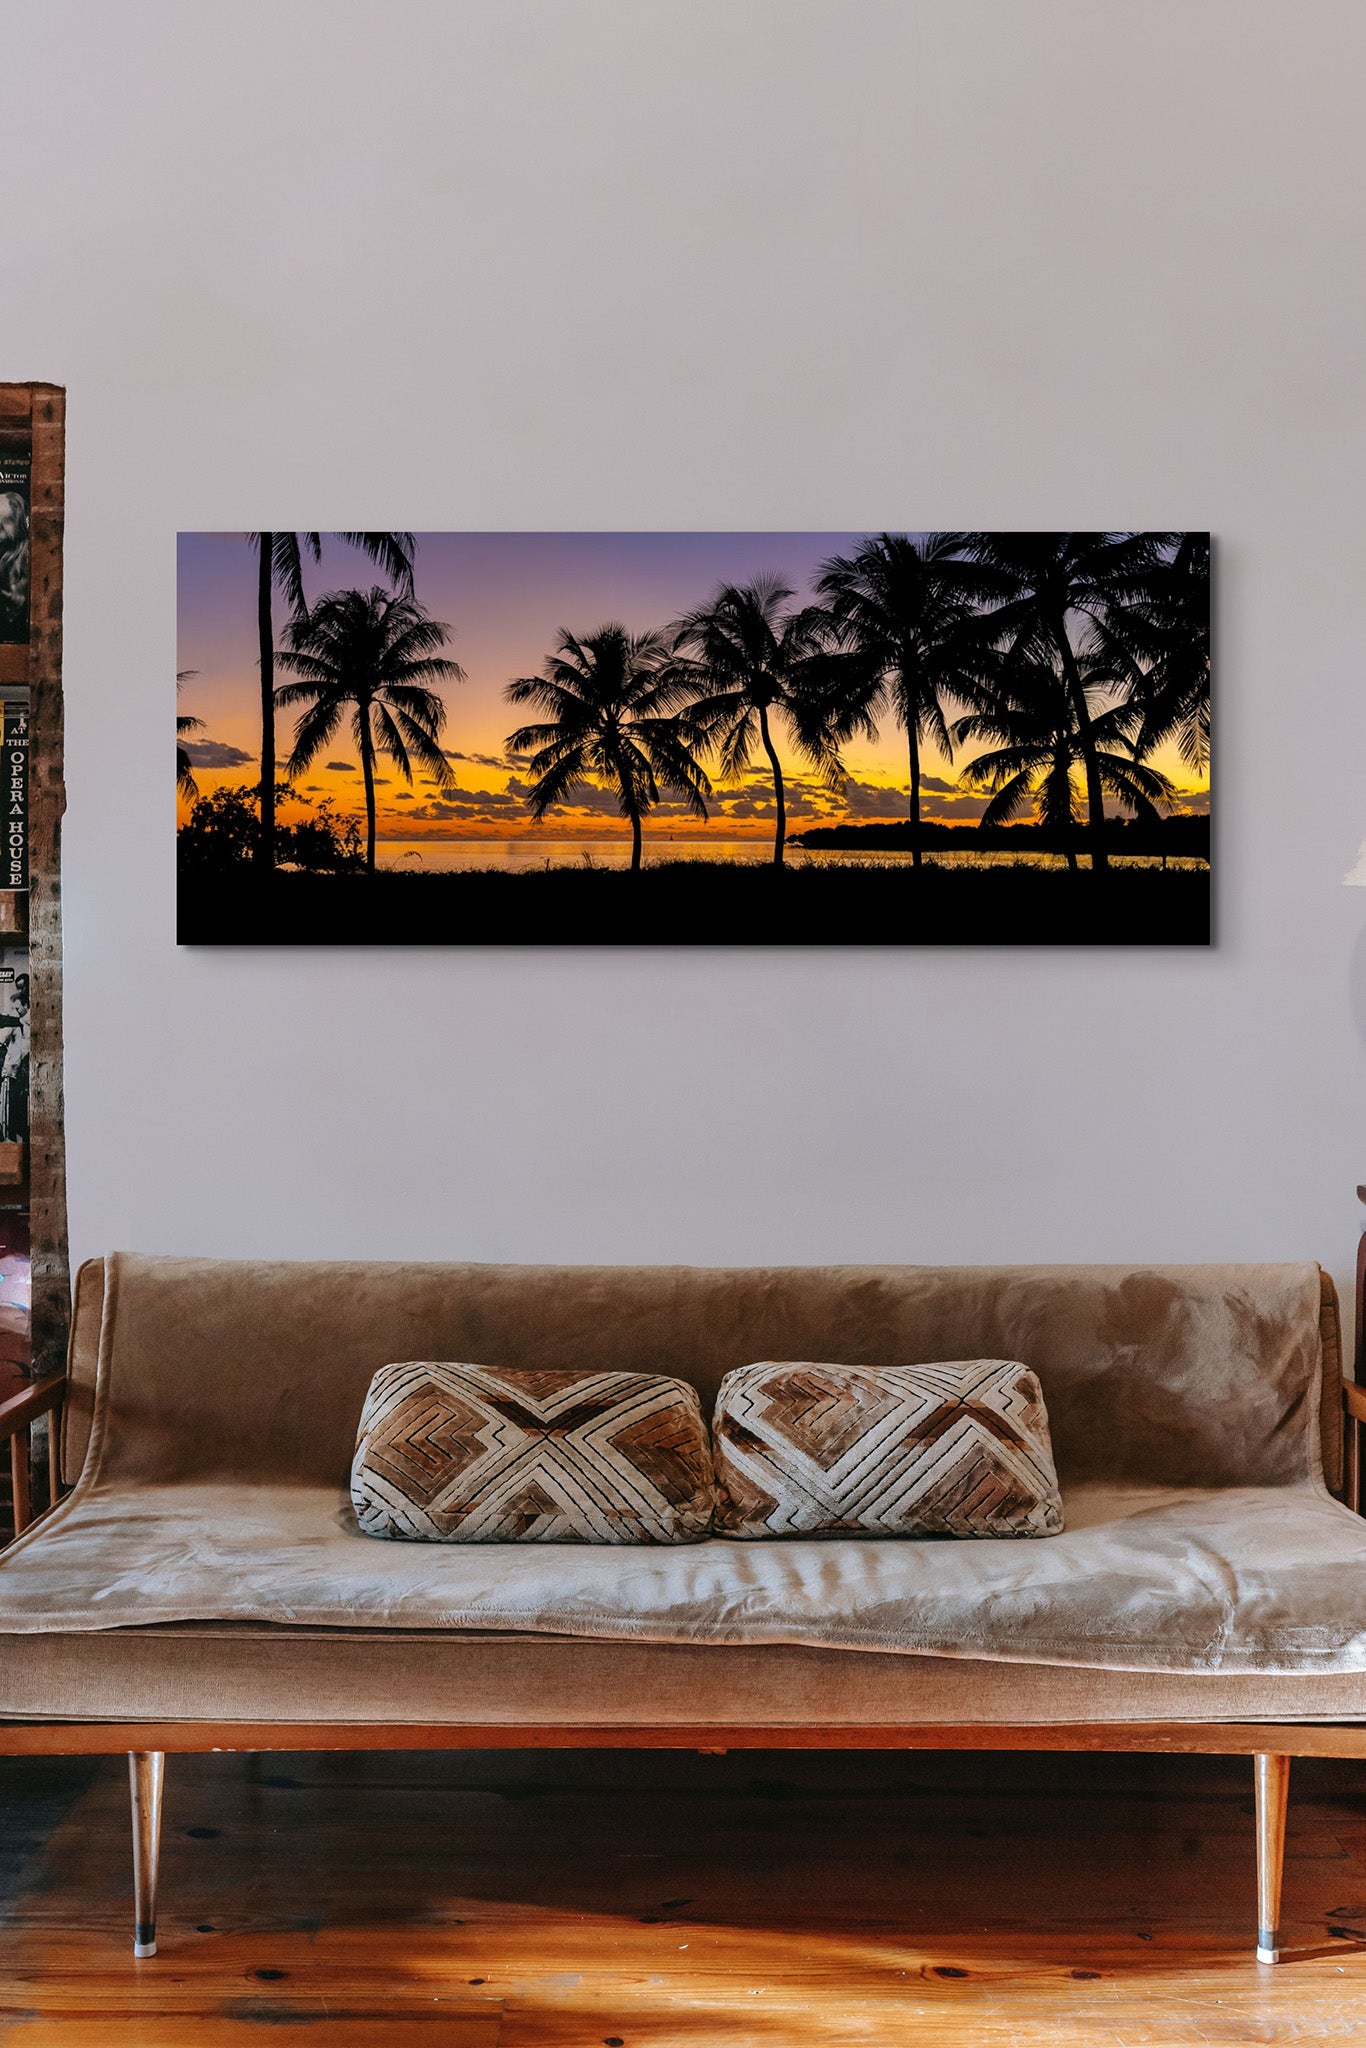 Picture hanging on the wall of a living room over a beige sofa. The picture is a fine art landscape photograph titled "Nautical Twilight" by Cameron Dreaux of Dreaux Fine Art.